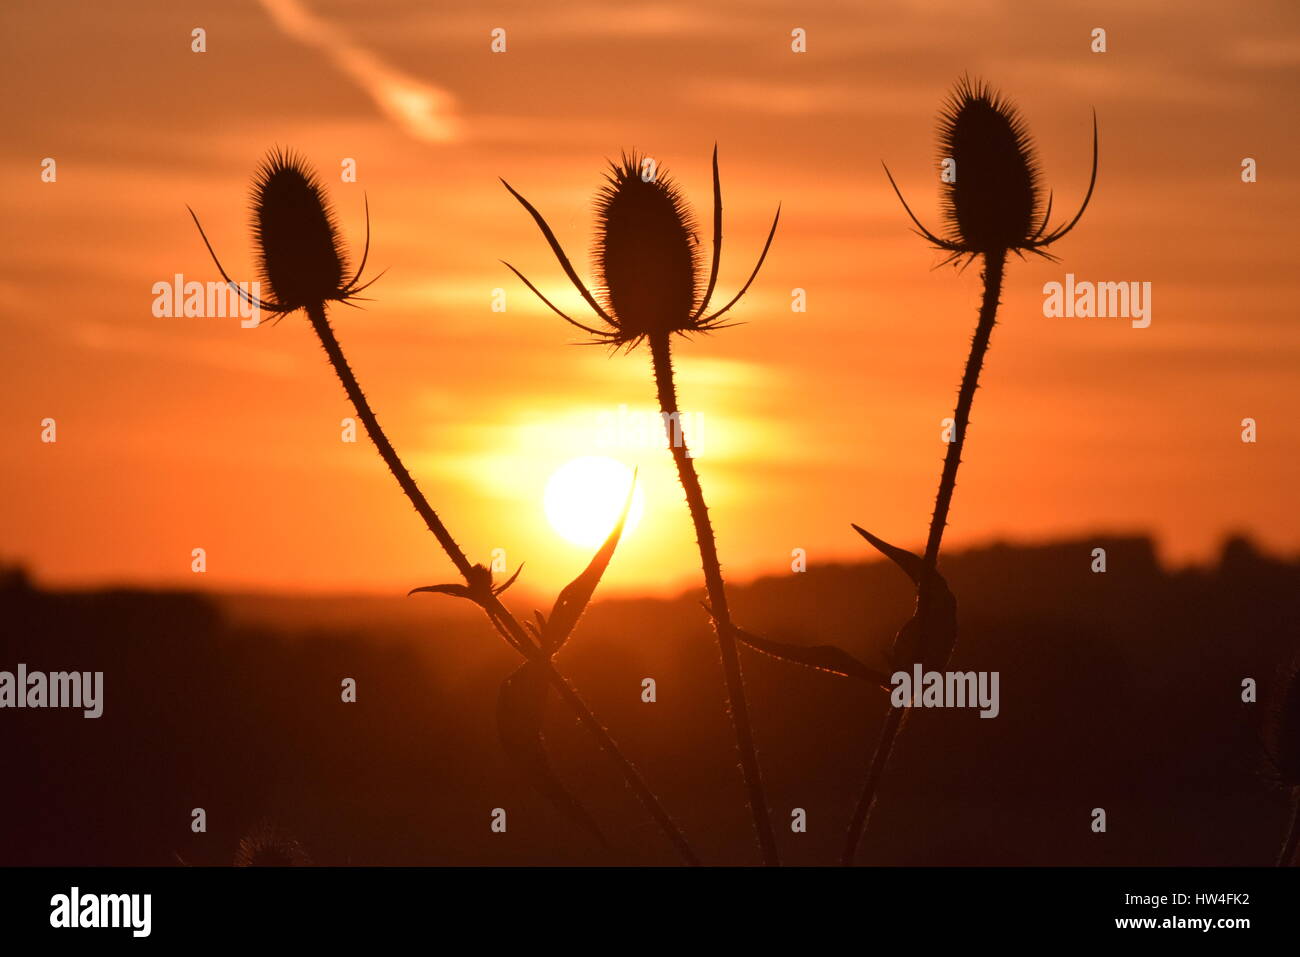 sunset behind flower silhouettes Stock Photo